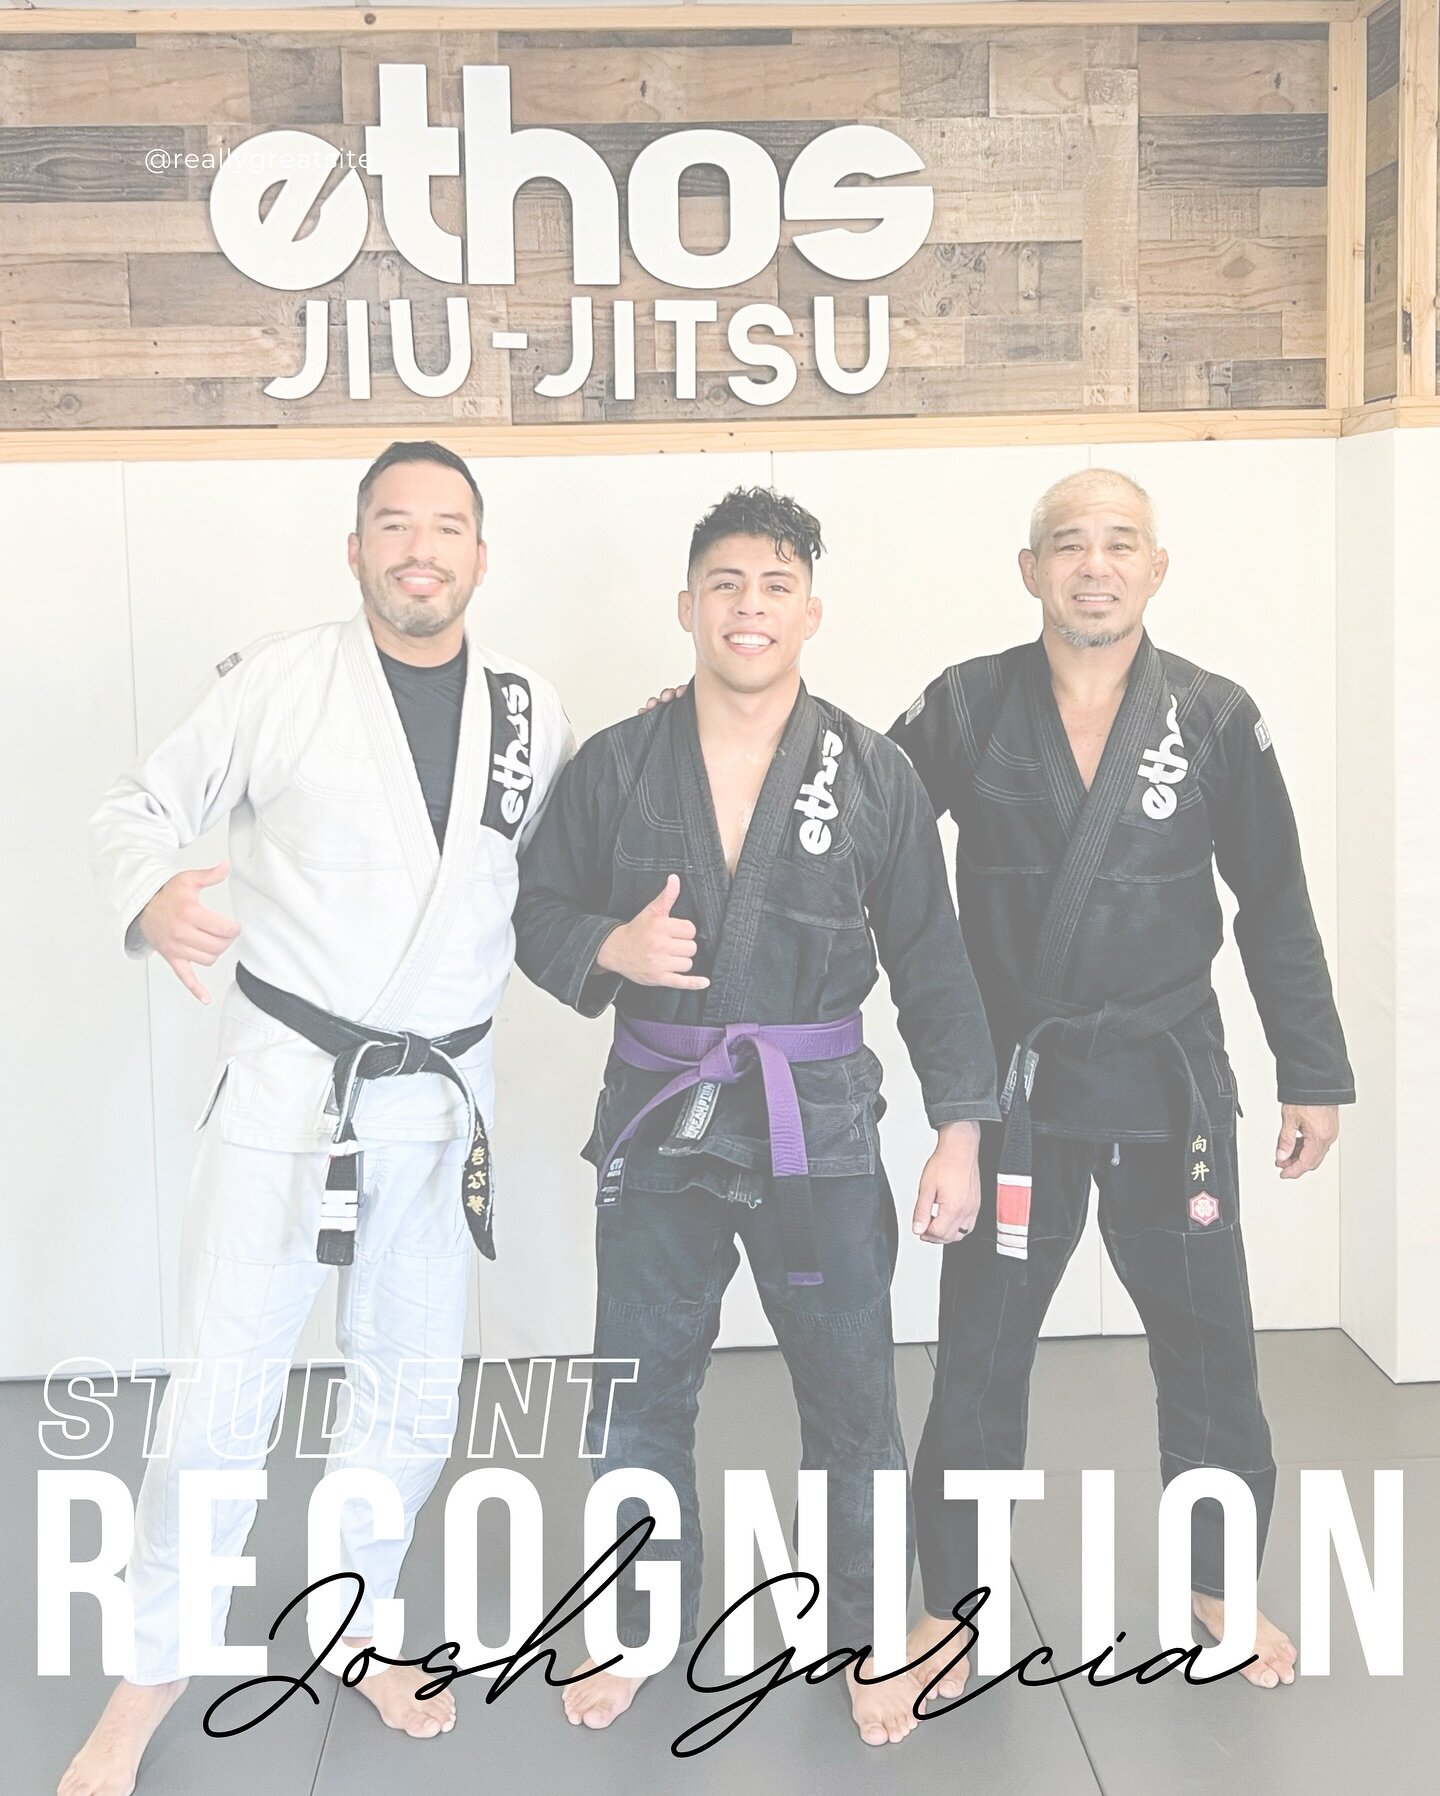 Student Recognition: shout out to Josh on receiving his purple belt today 🟪🟪🟪🟪🟪⬛️⬛️🟪🟪 🙌🏽 He missed promotions but we could up with him today at open mat. Congrats Josh 🤙🏽 drop a message for Josh ⤵️